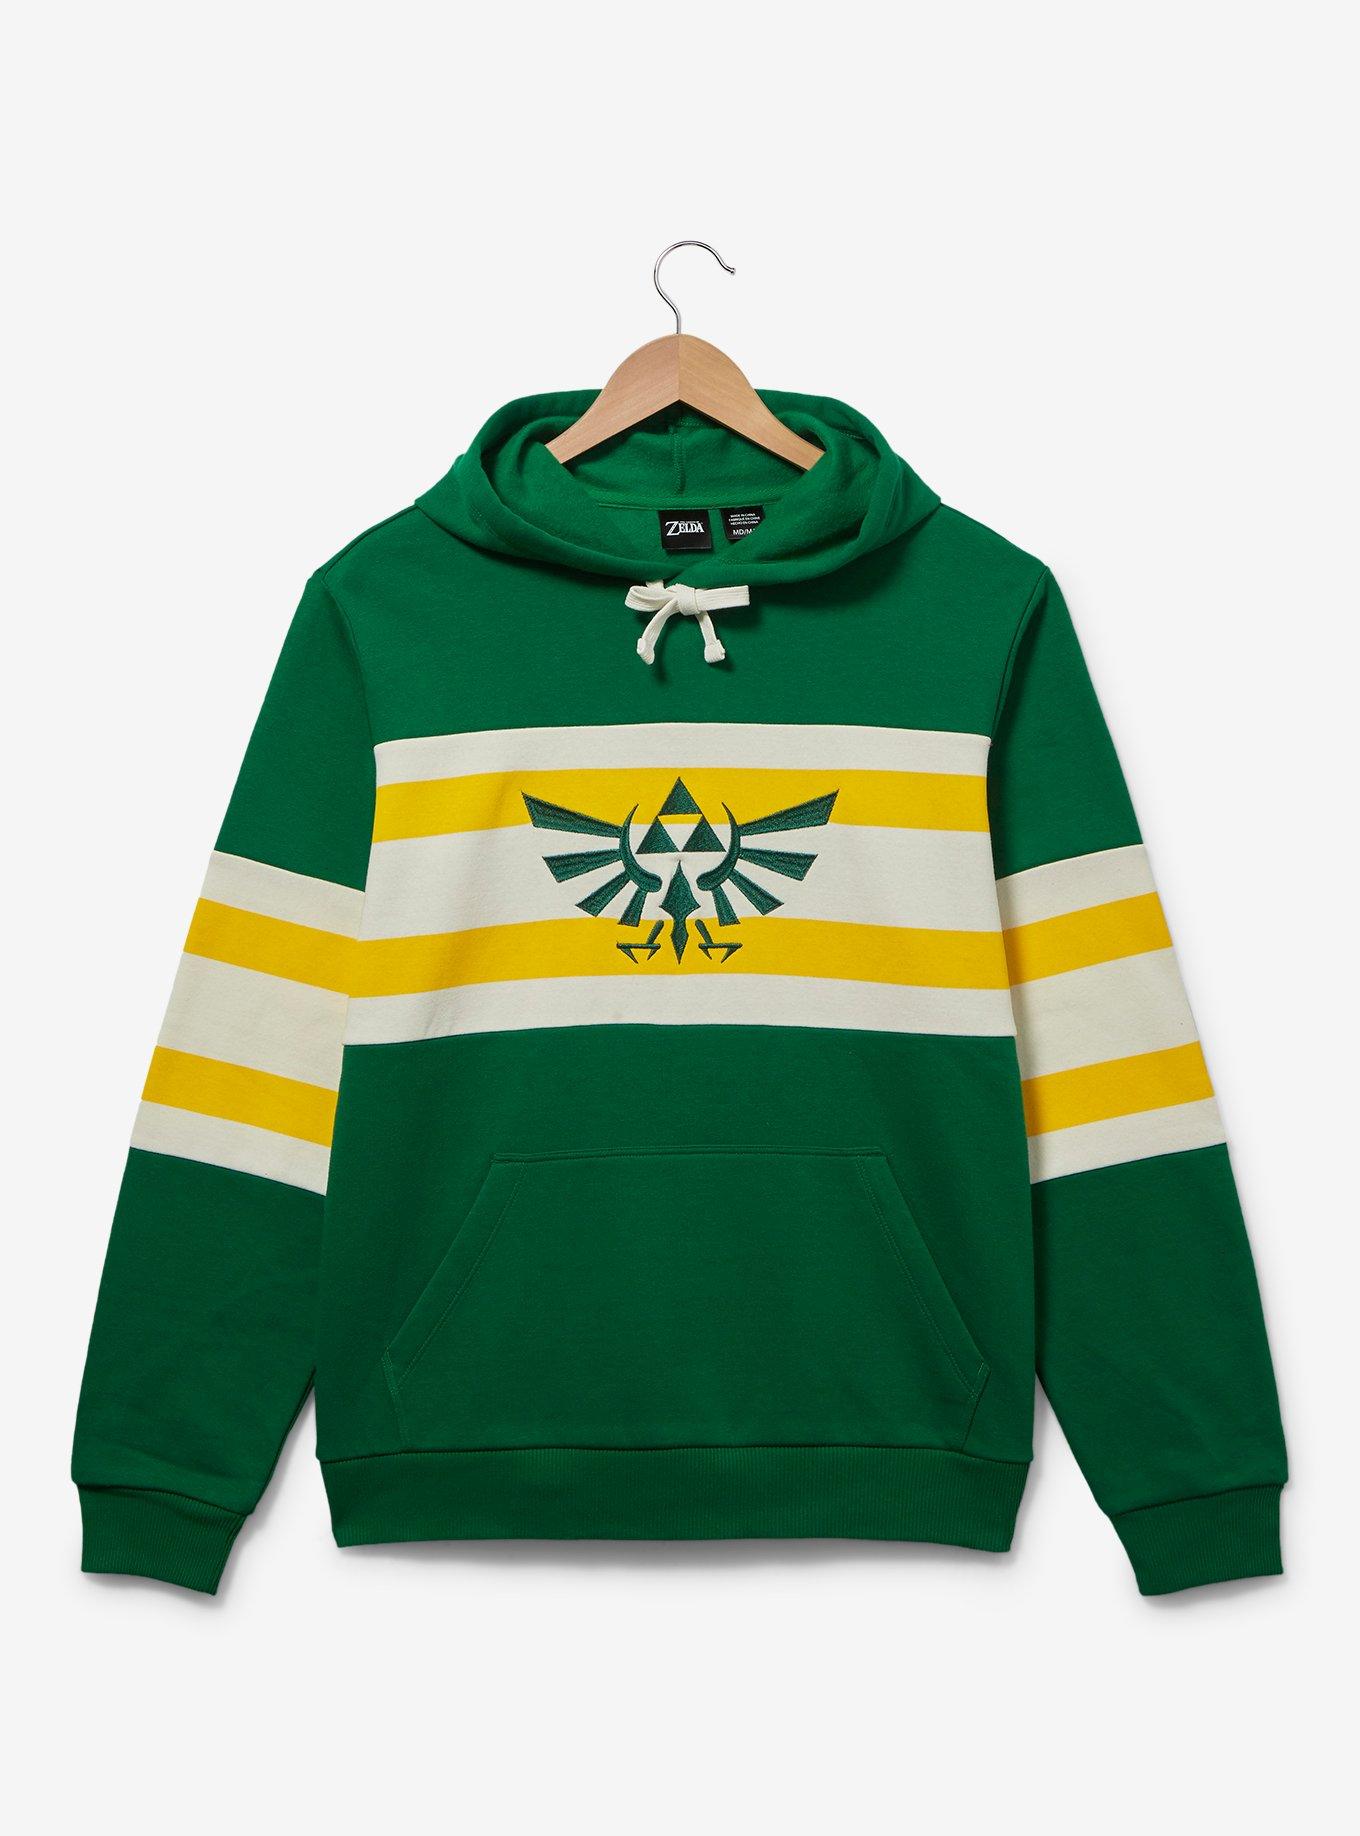 Nintendo NY on X: The Legend of #Zelda series launched in February 1986.  Journey to #NintendoNYC and pick up this exclusive hoodie and other Legend  of #Zelda merchandise!  / X